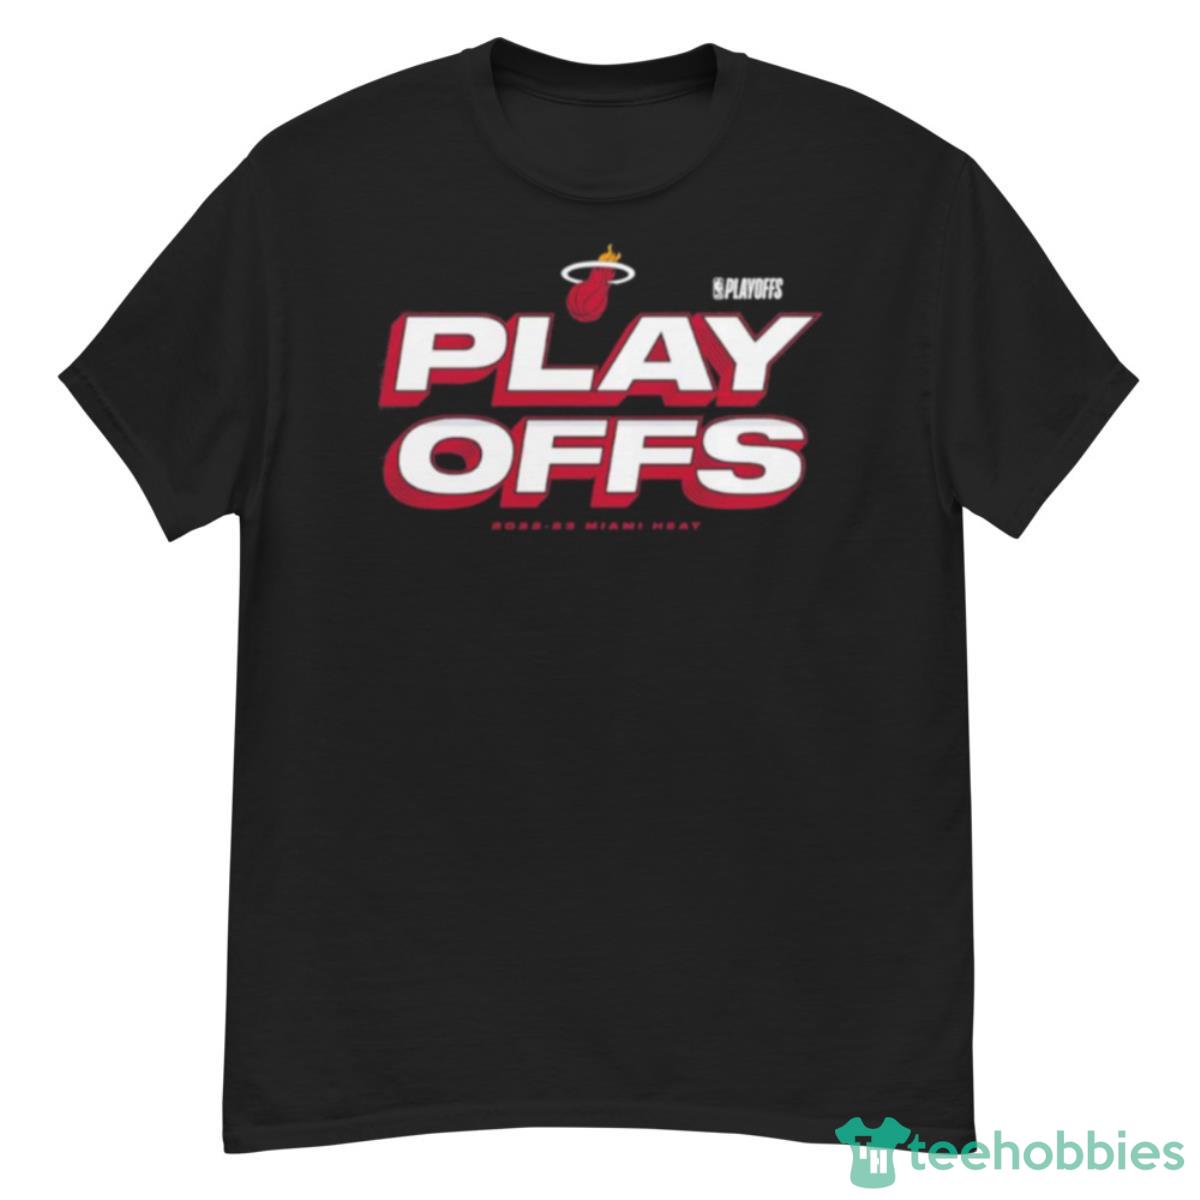 Best Miami Heat apparel to buy on Fanatics for the 2023 NBA Finals